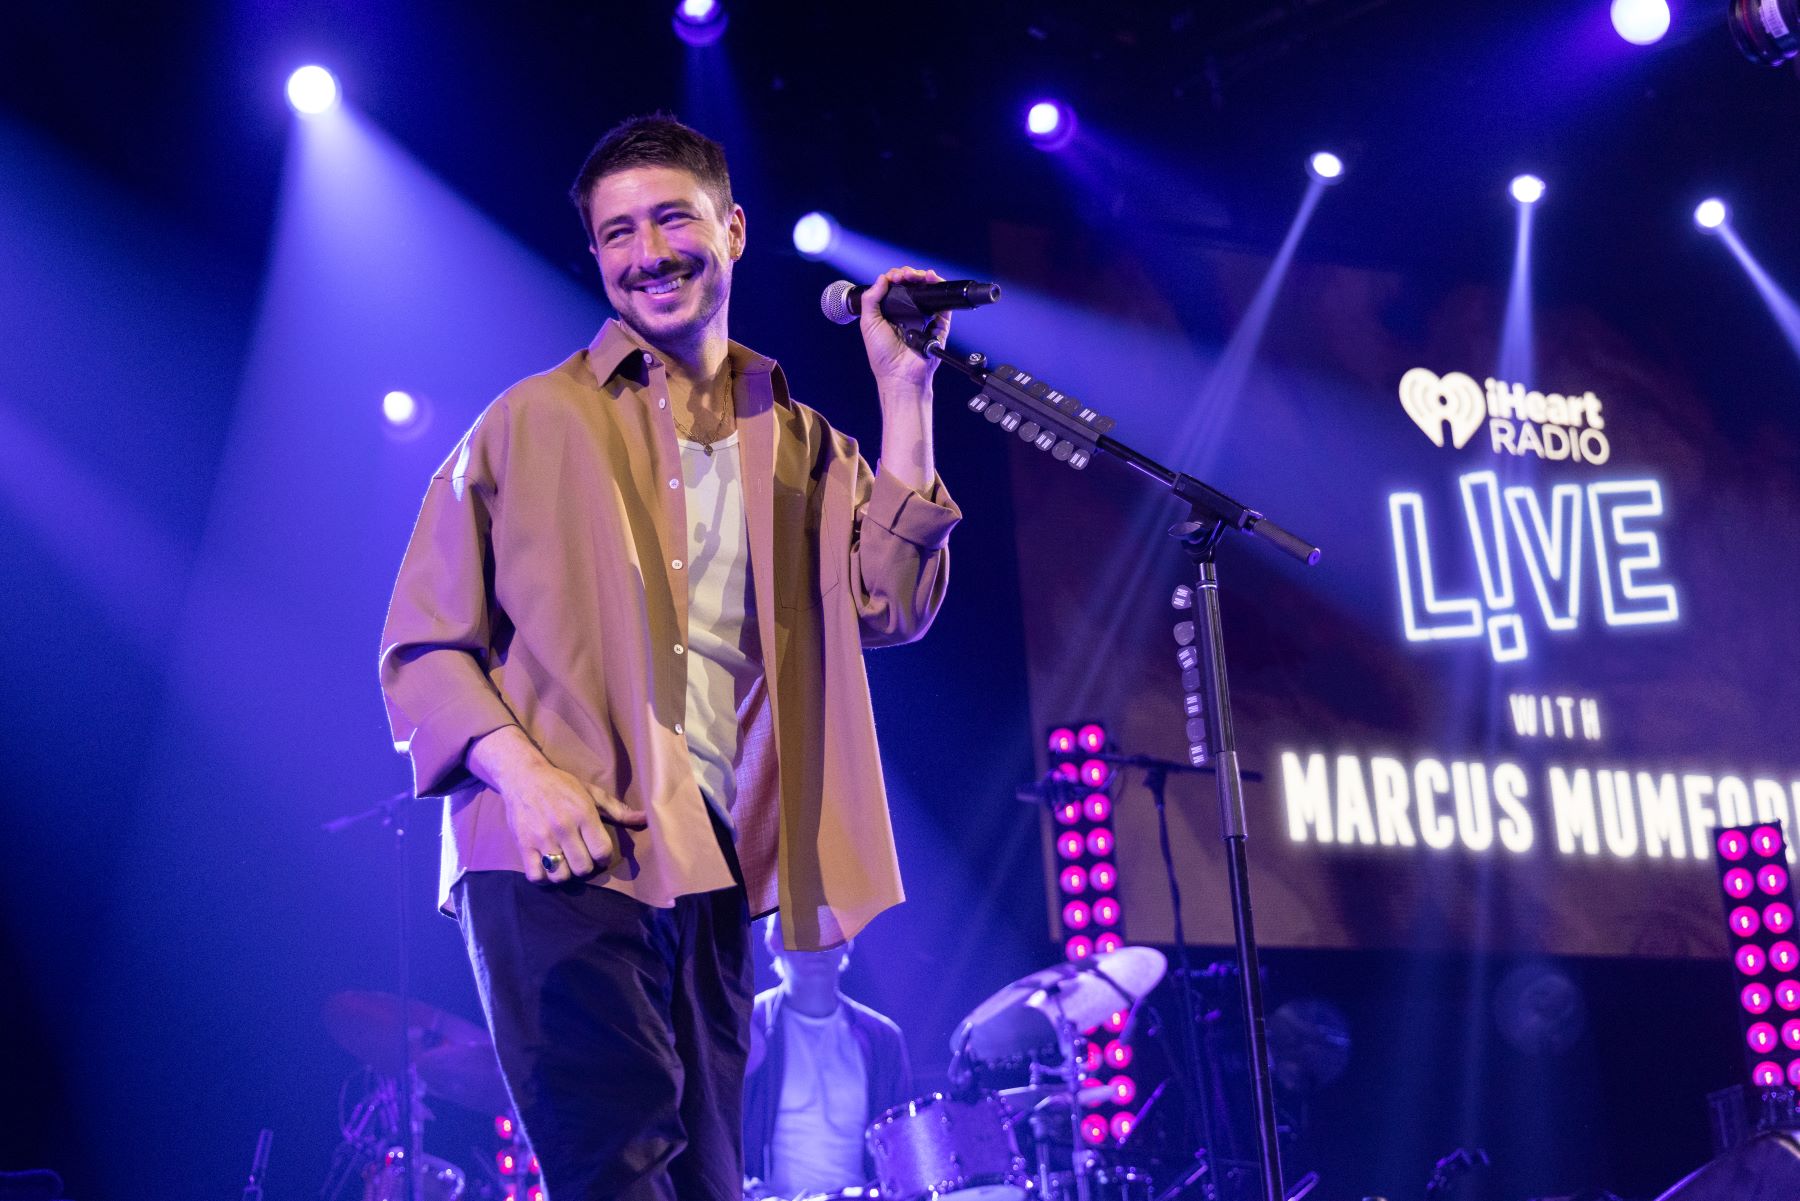 Marcus Mumford of Mumford & Sons performing at the iHeartRadio theatre in Burbank, California